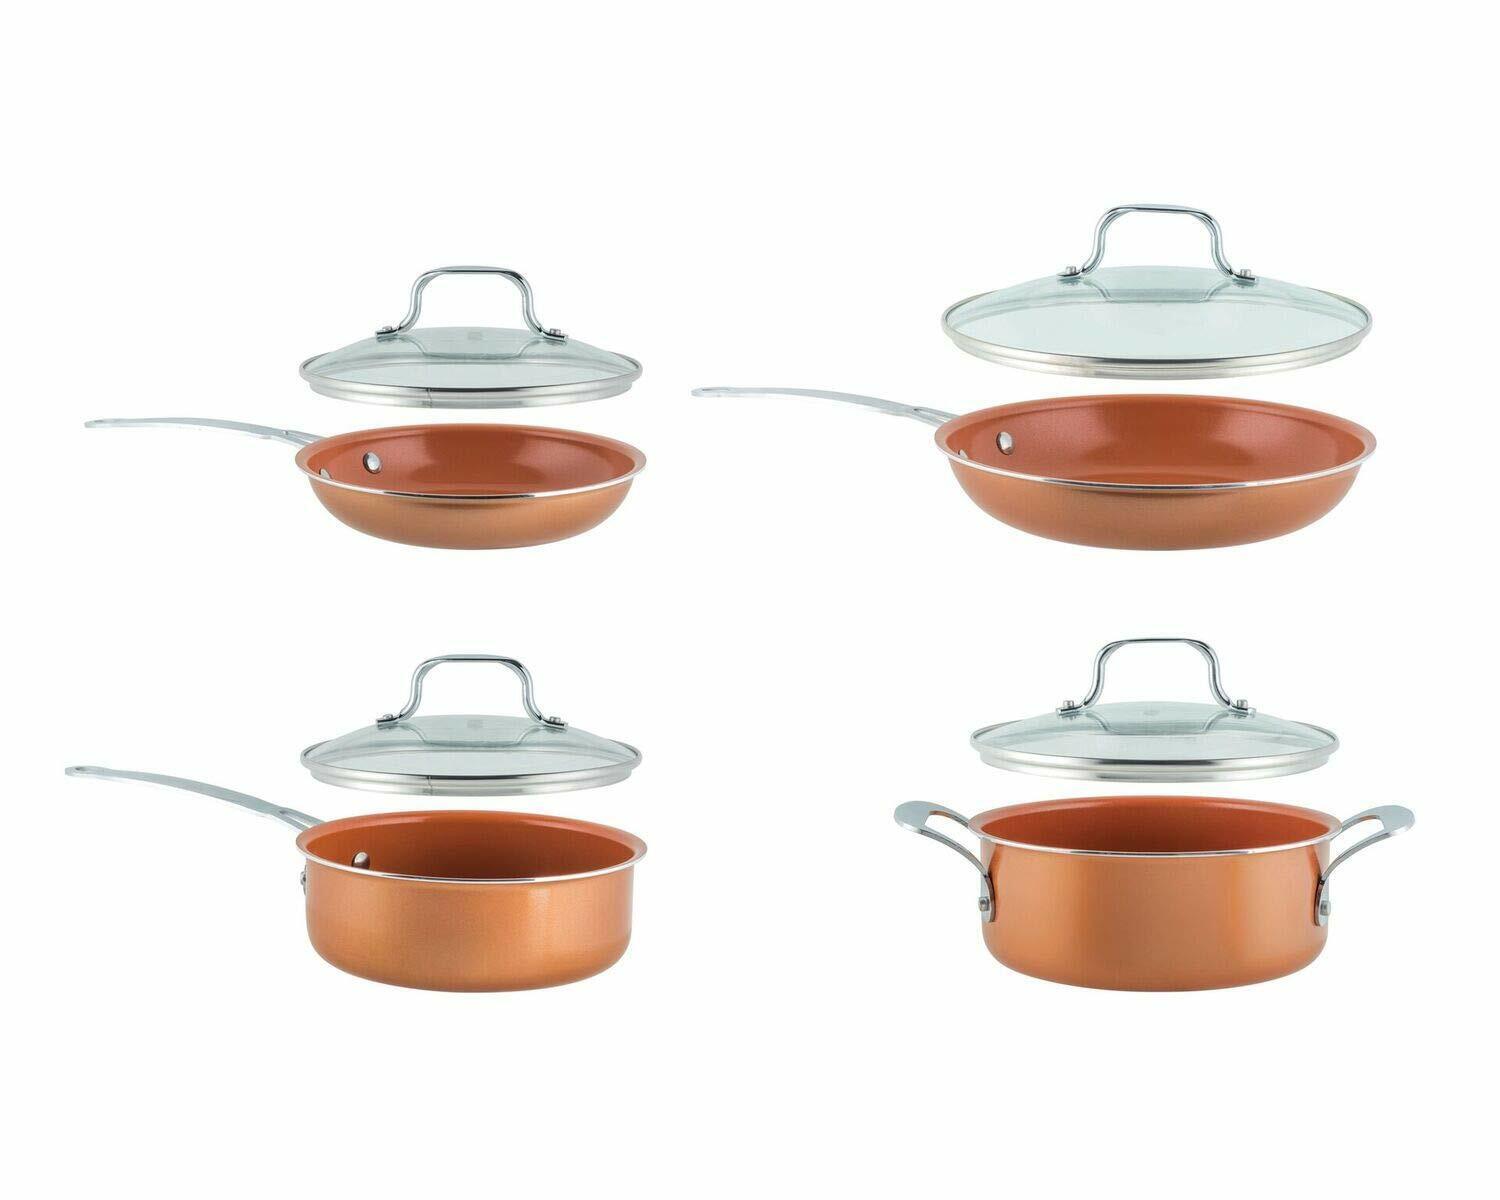 8-Piece Copper Induction Ceramic Nonstick Coating Alum/Stainless Cookware Set